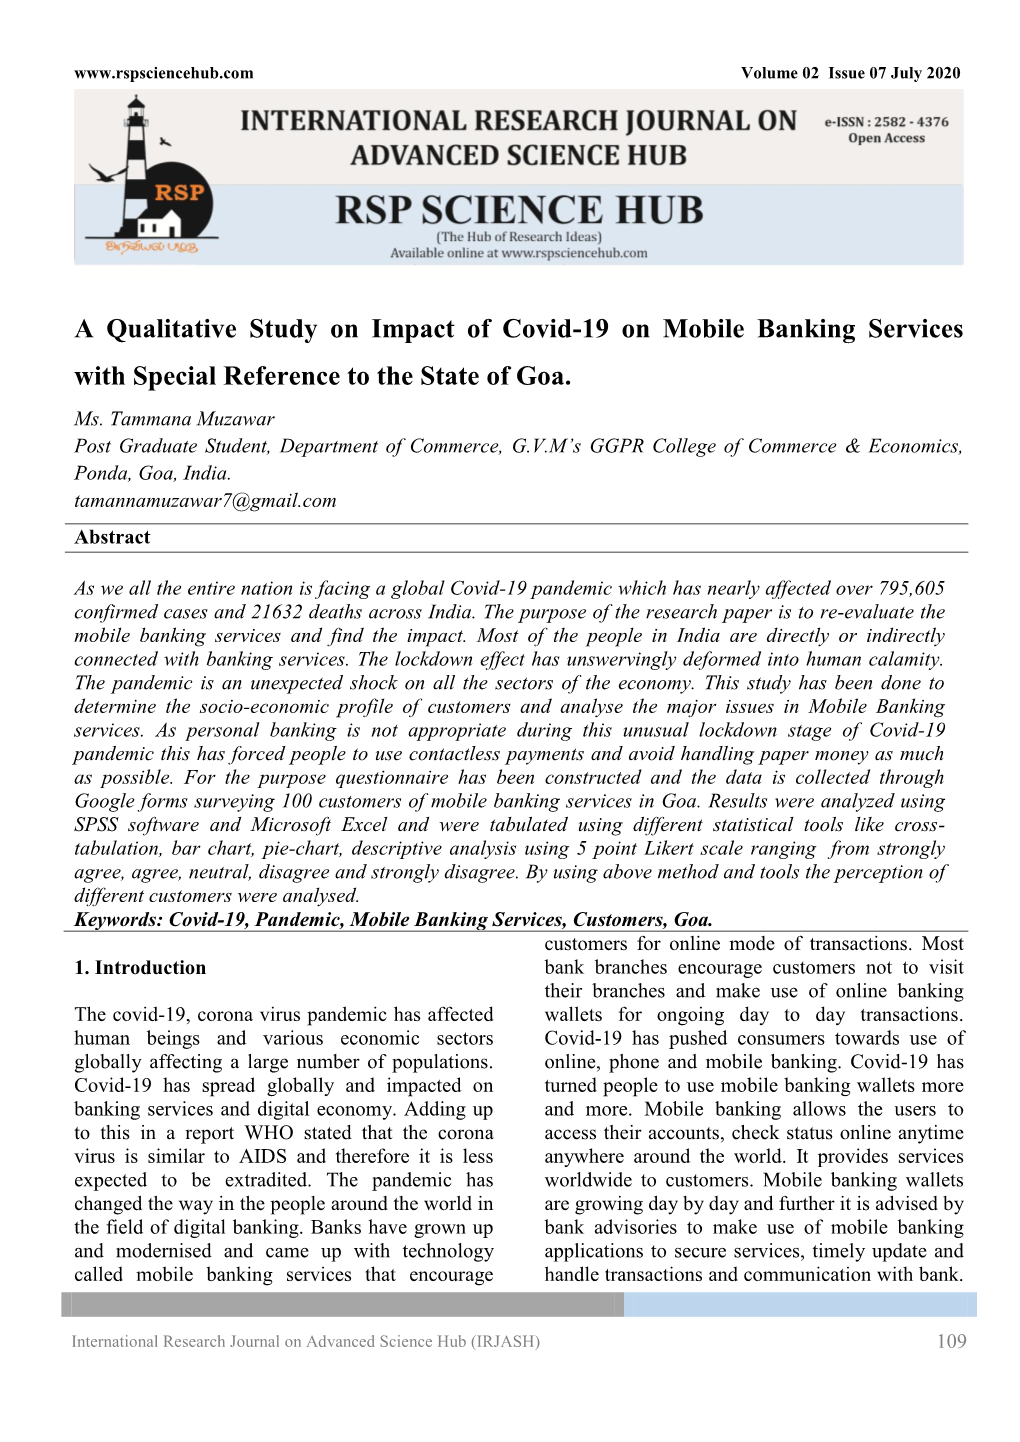 A Qualitative Study on Impact of Covid-19 on Mobile Banking Services with Special Reference to the State of Goa